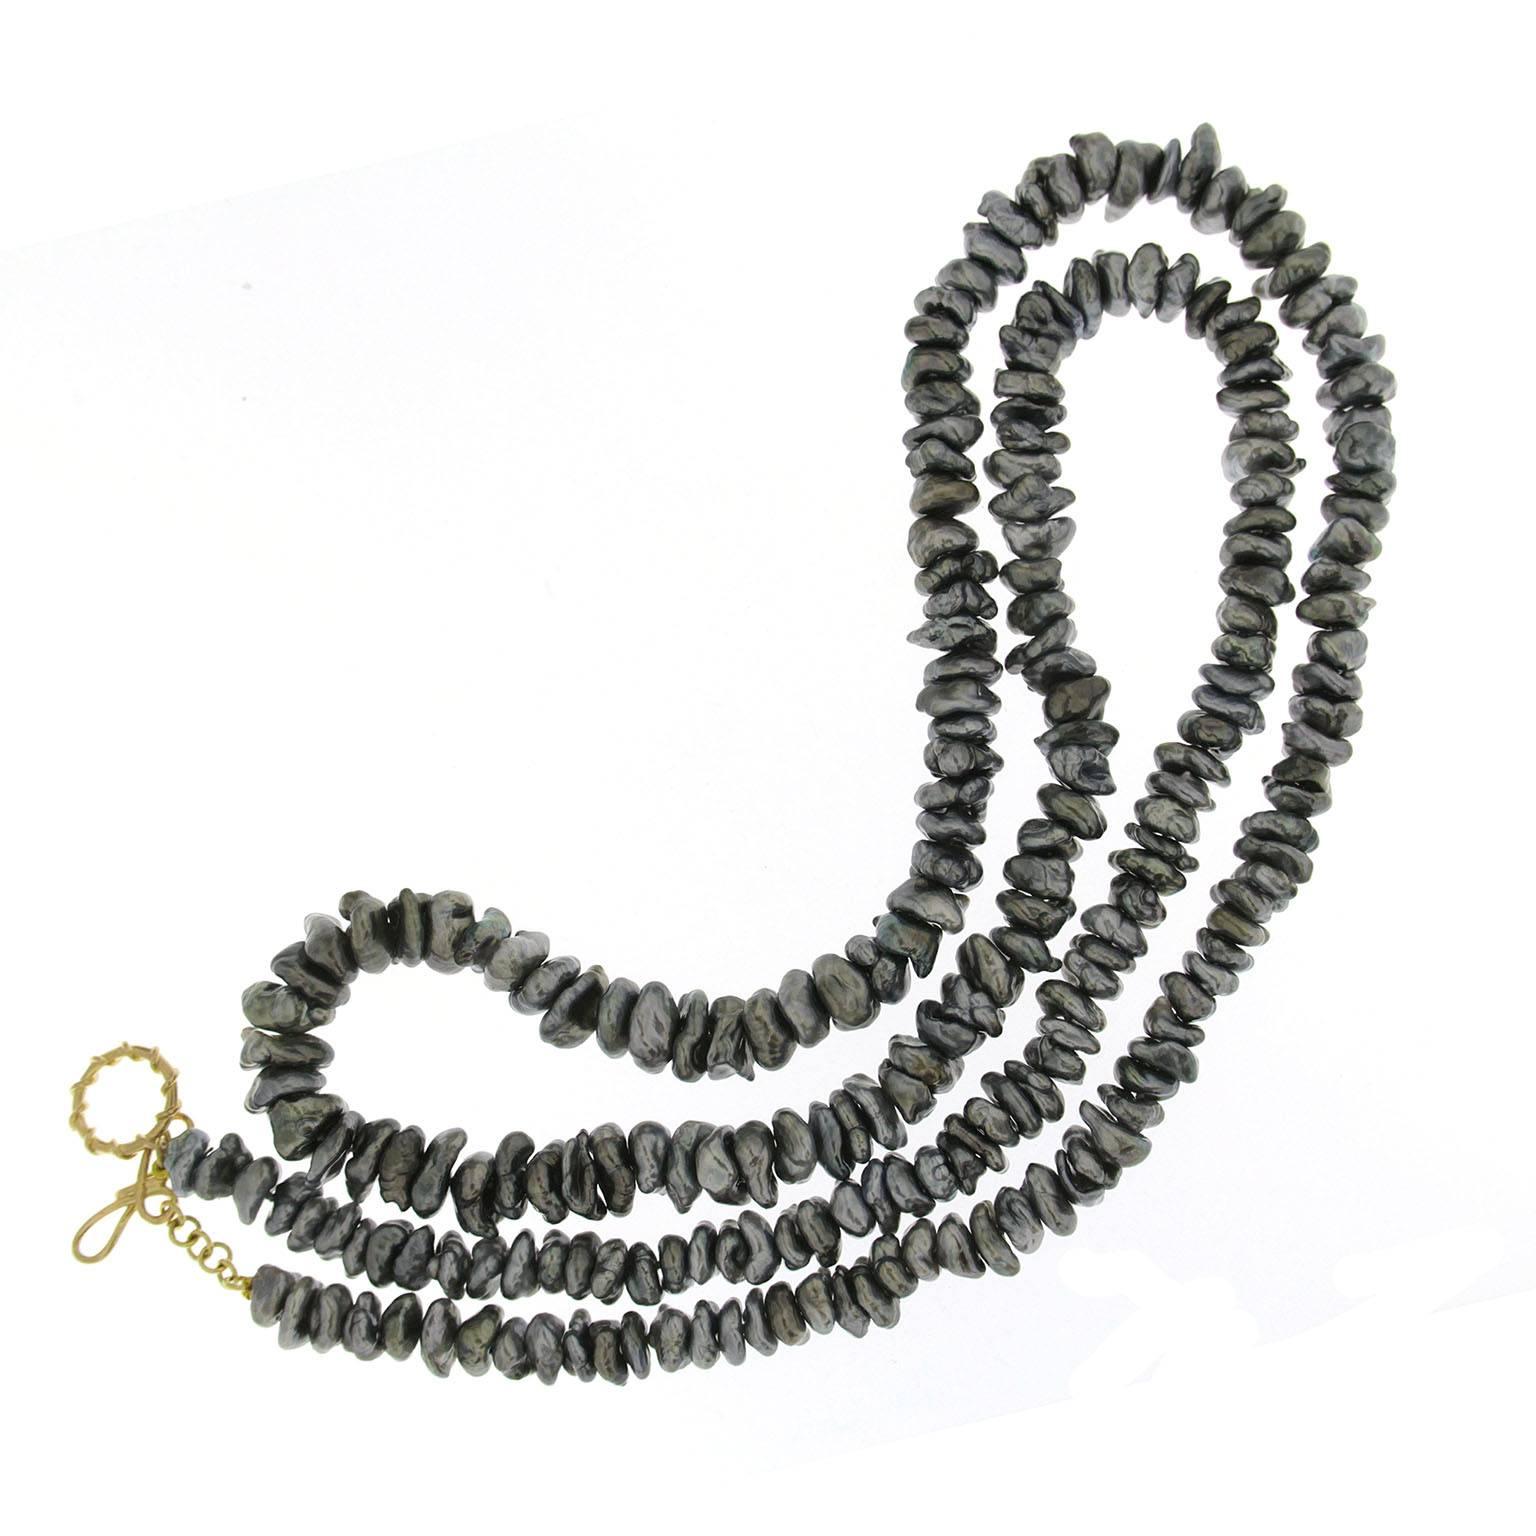 This necklace features Keshi Tahitian baroque pearls with 18kt yellow gold clasp of knot clasp ring and and toggle.